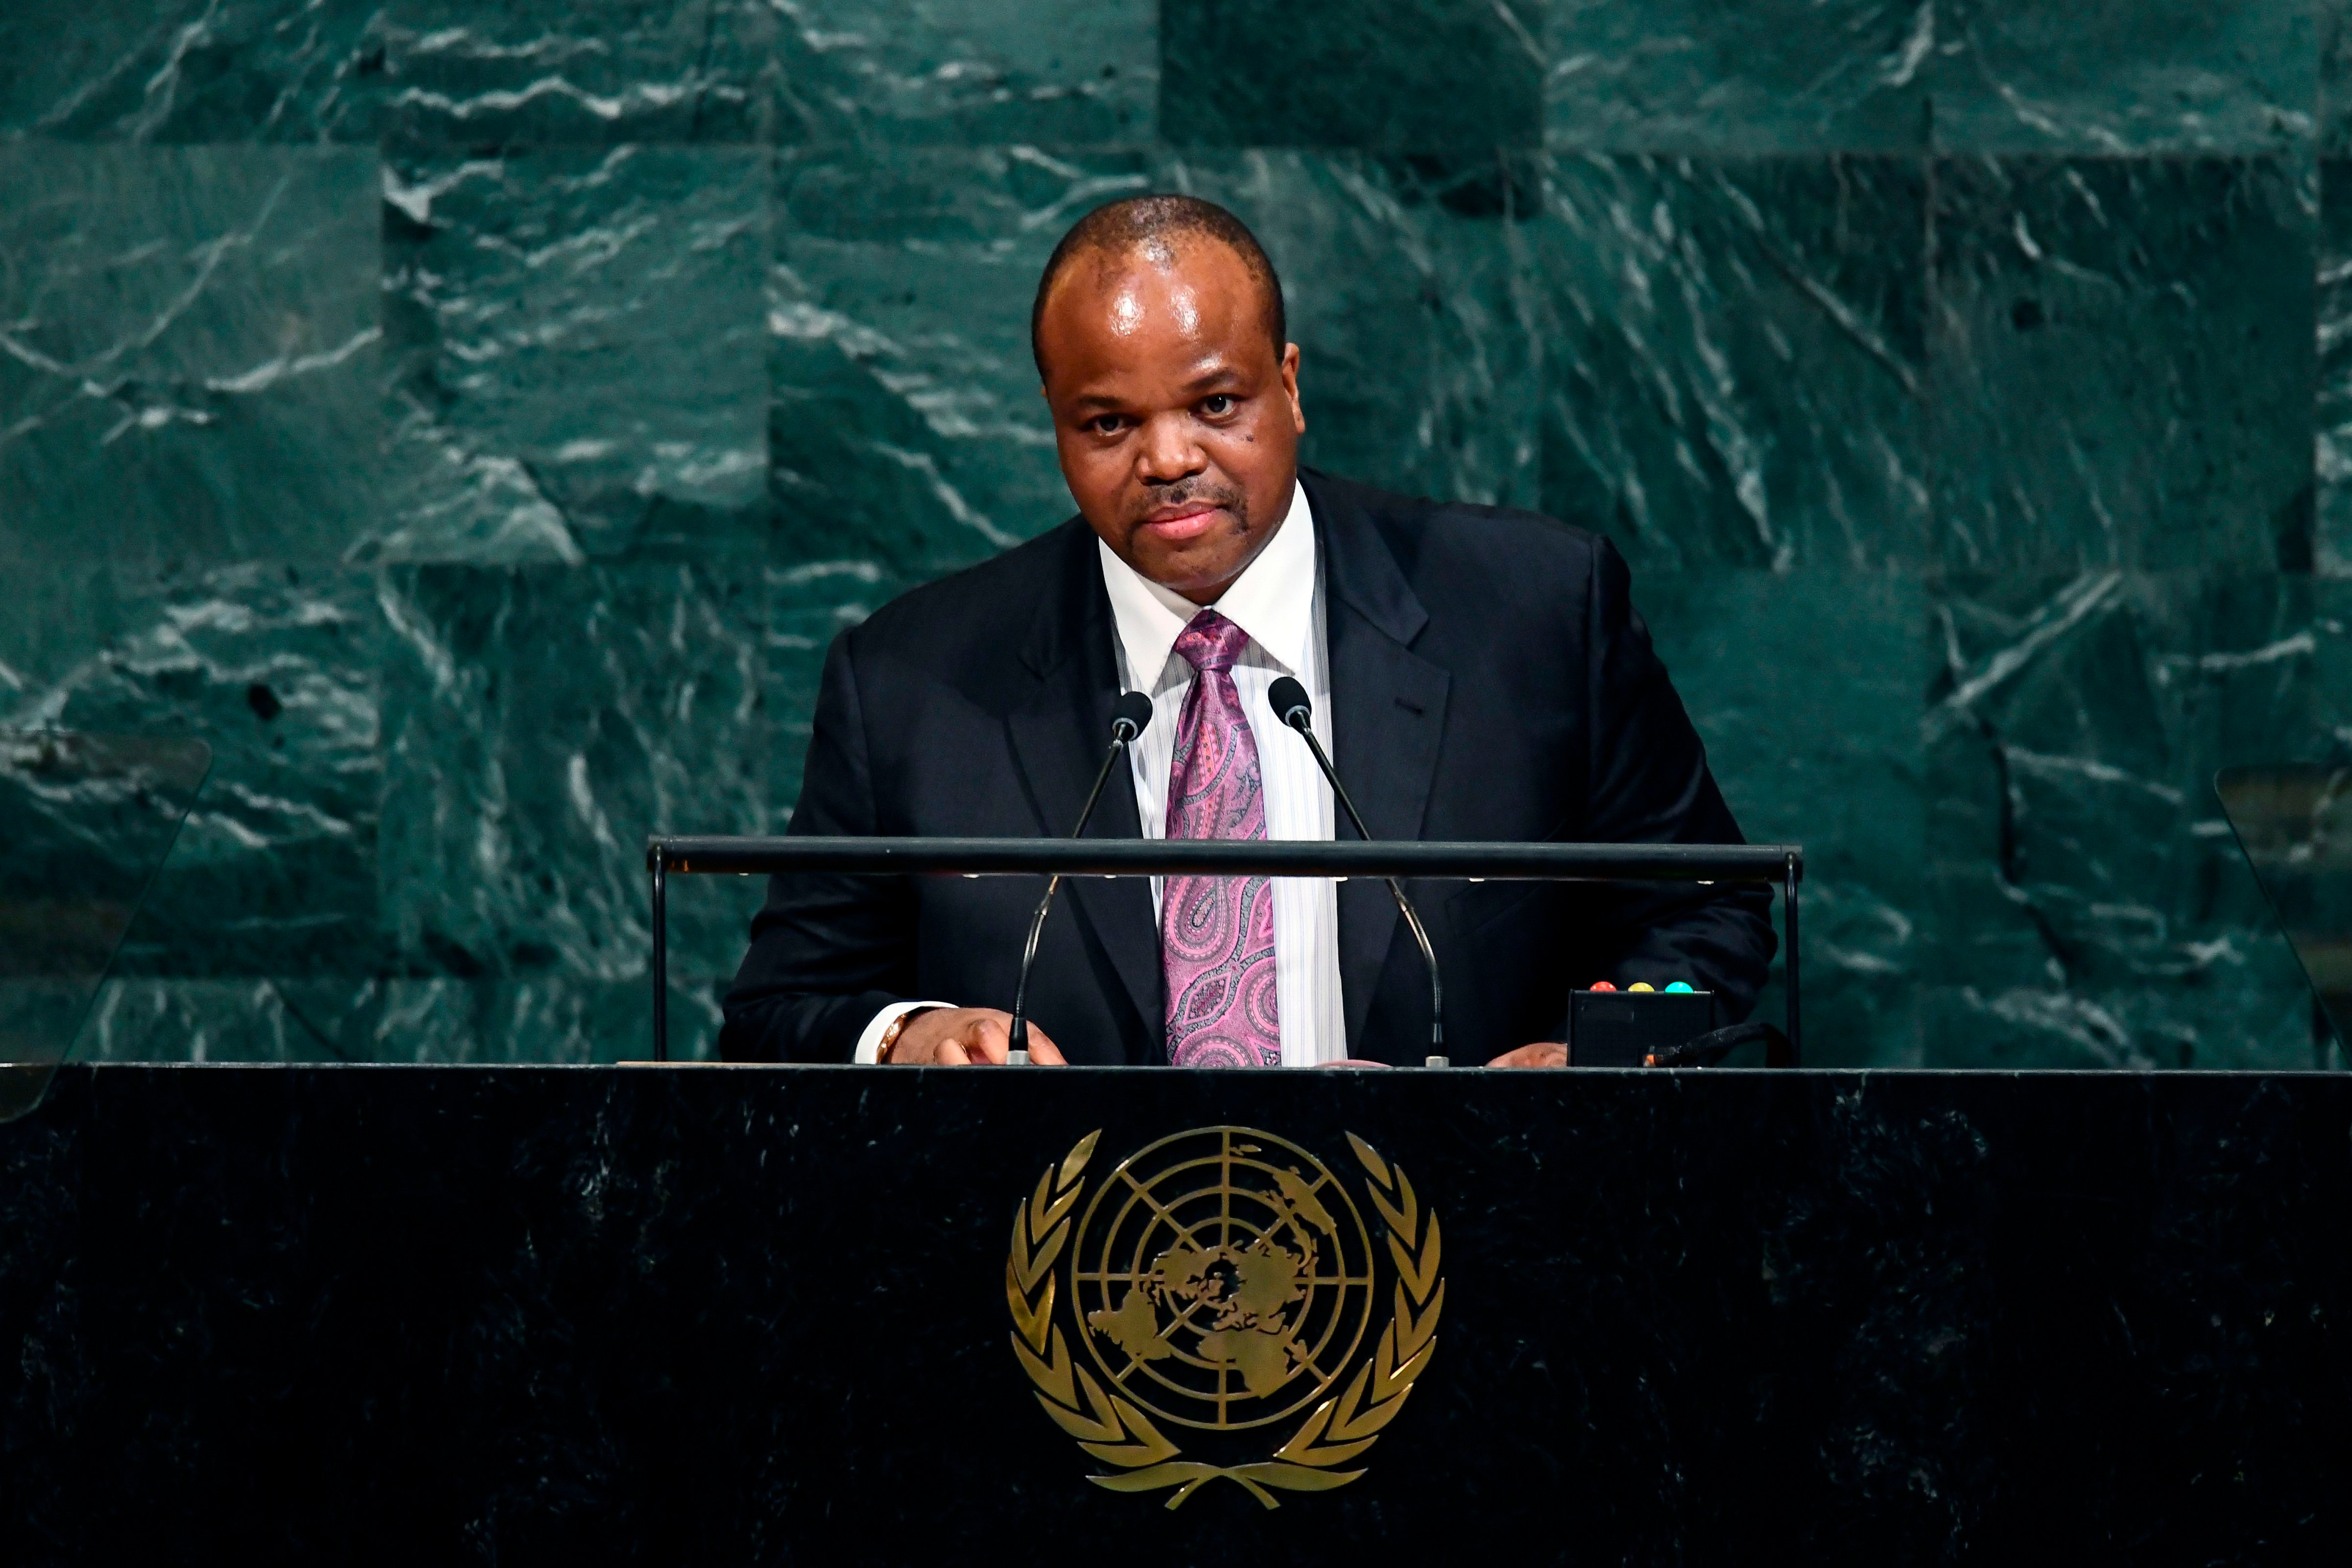 Swaziland's King Mswati III addresses the U.N. General Assembly in New York on Sept. 20, 2017. The king said that he was officially changing the country's name to eSwatini. (Jewel Samad&mdash;AFP/Getty Images)